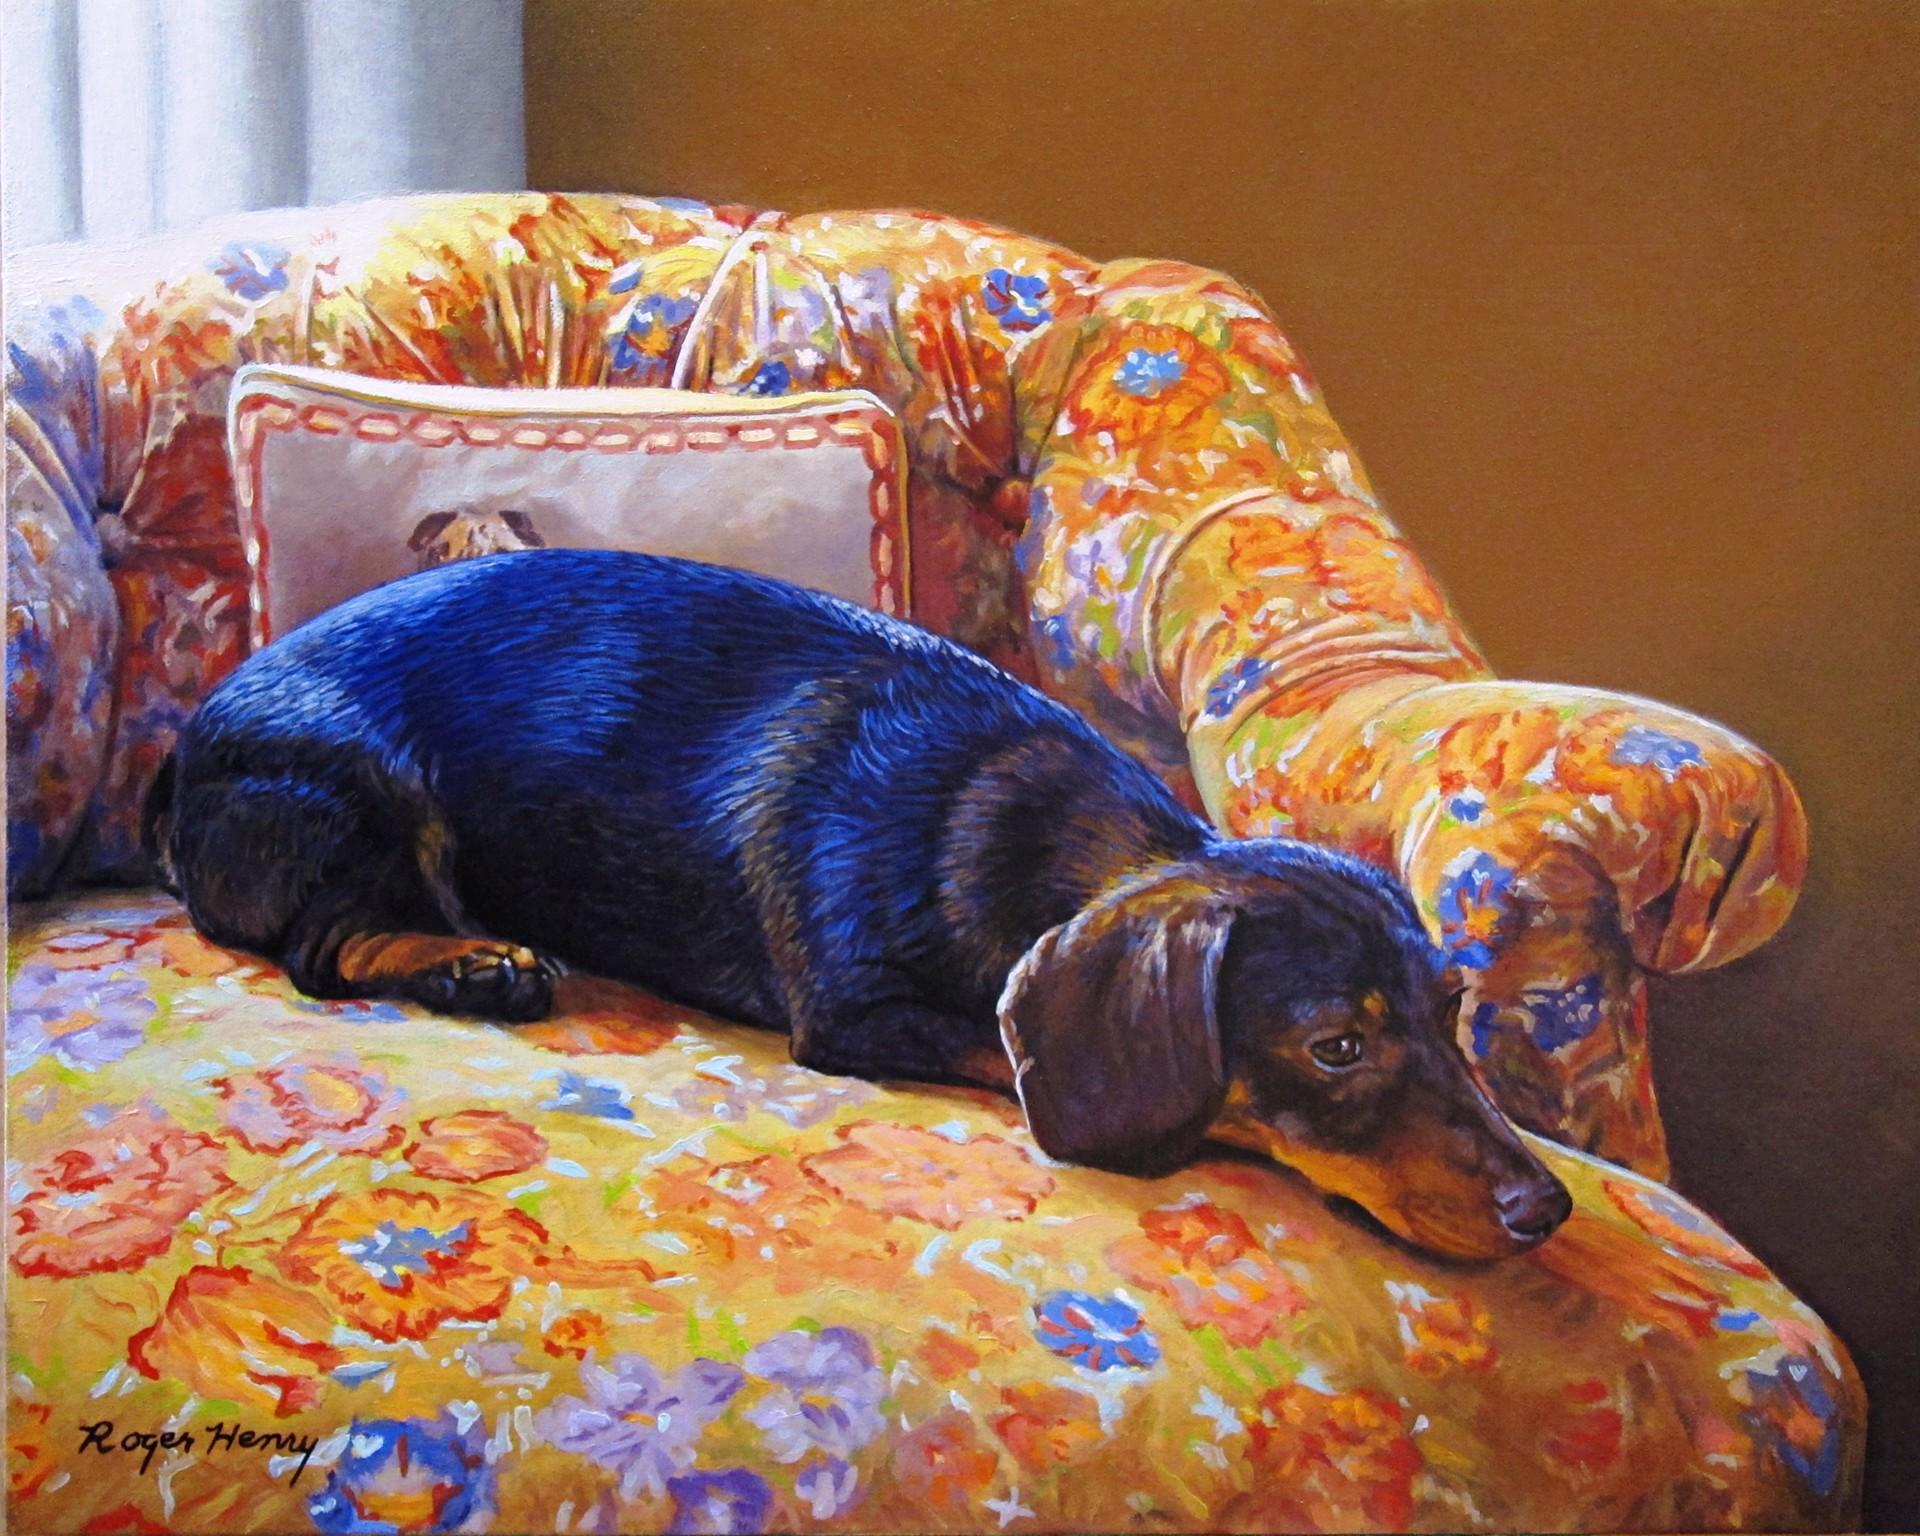 Roger Henry Animal Painting - Vivid Dachshund realist painting on blue and yellow chair by animal portraitist